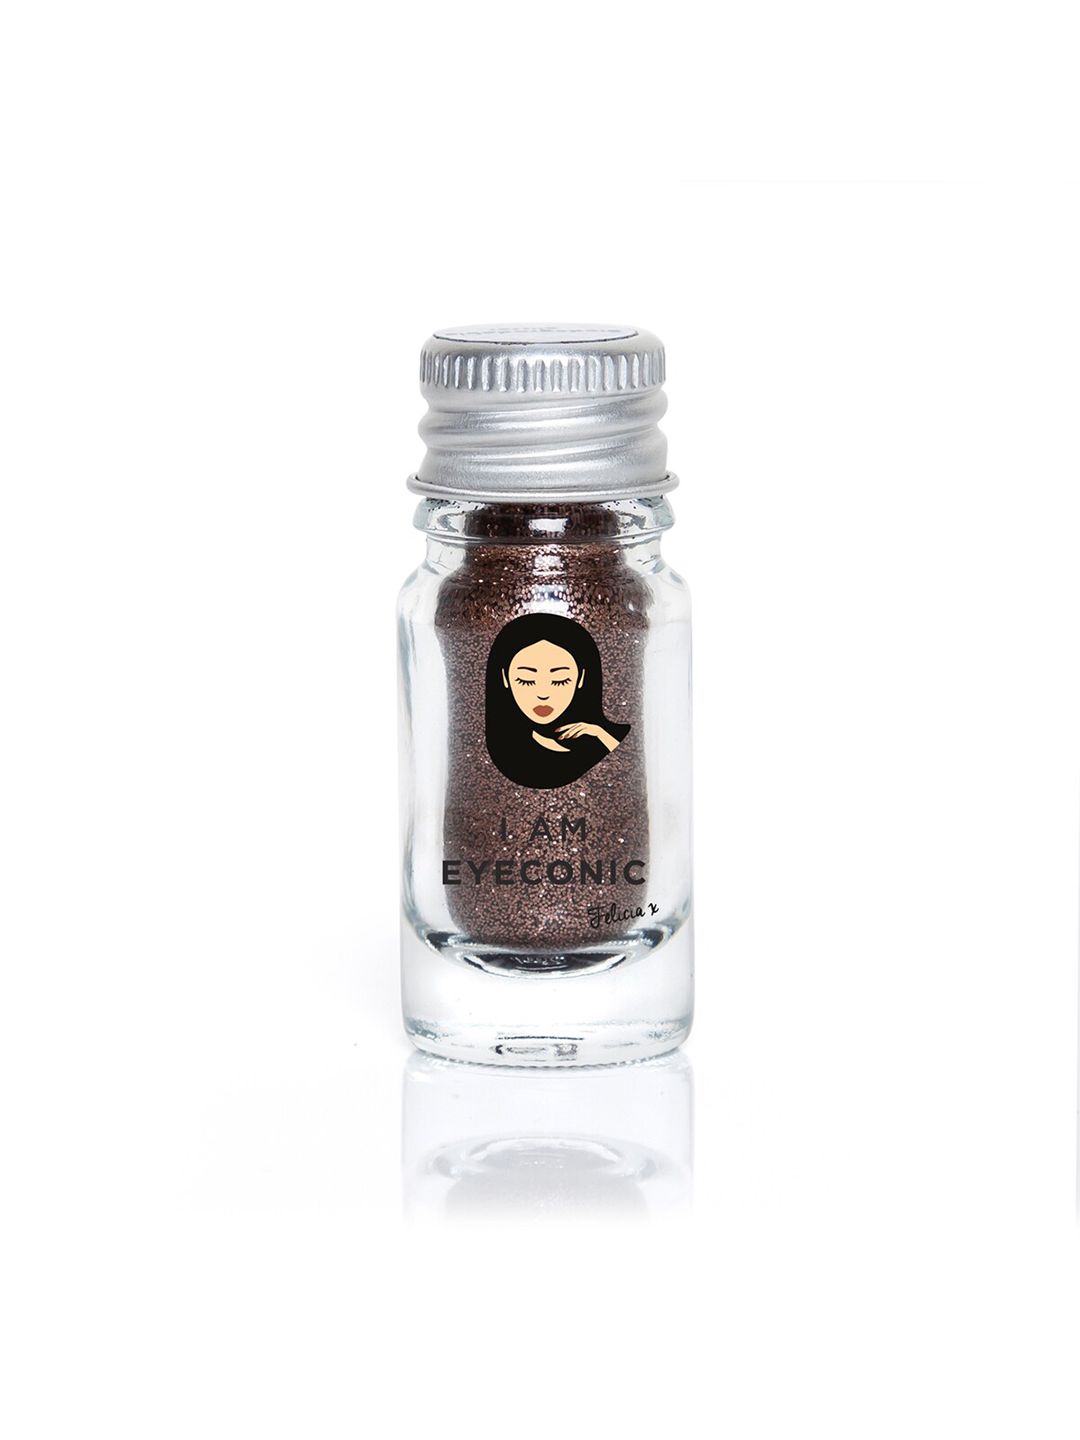 I AM EYECONIC Fine Cosmetic Glitters 4 g - Chocolate Price in India